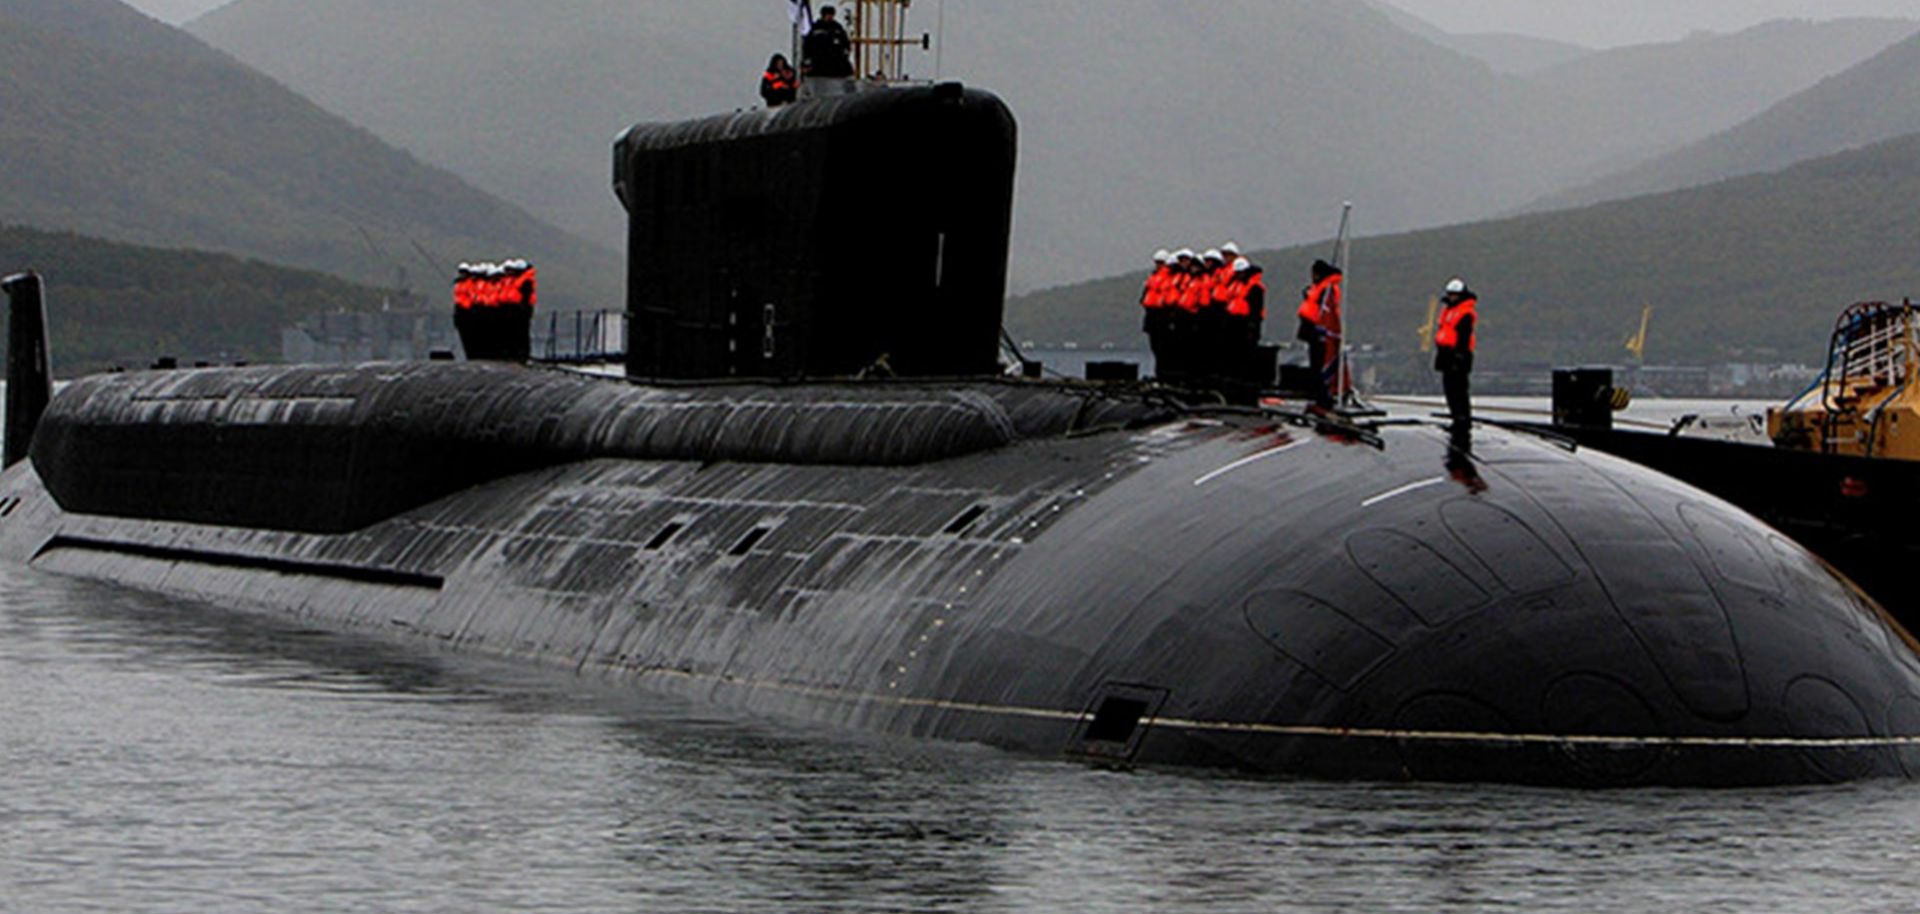 A Borei-class Russian submarine like the Alexander Nevsky (pictured) will be used to fire a new type of submarine-launched ballistic missile in an upcoming test.